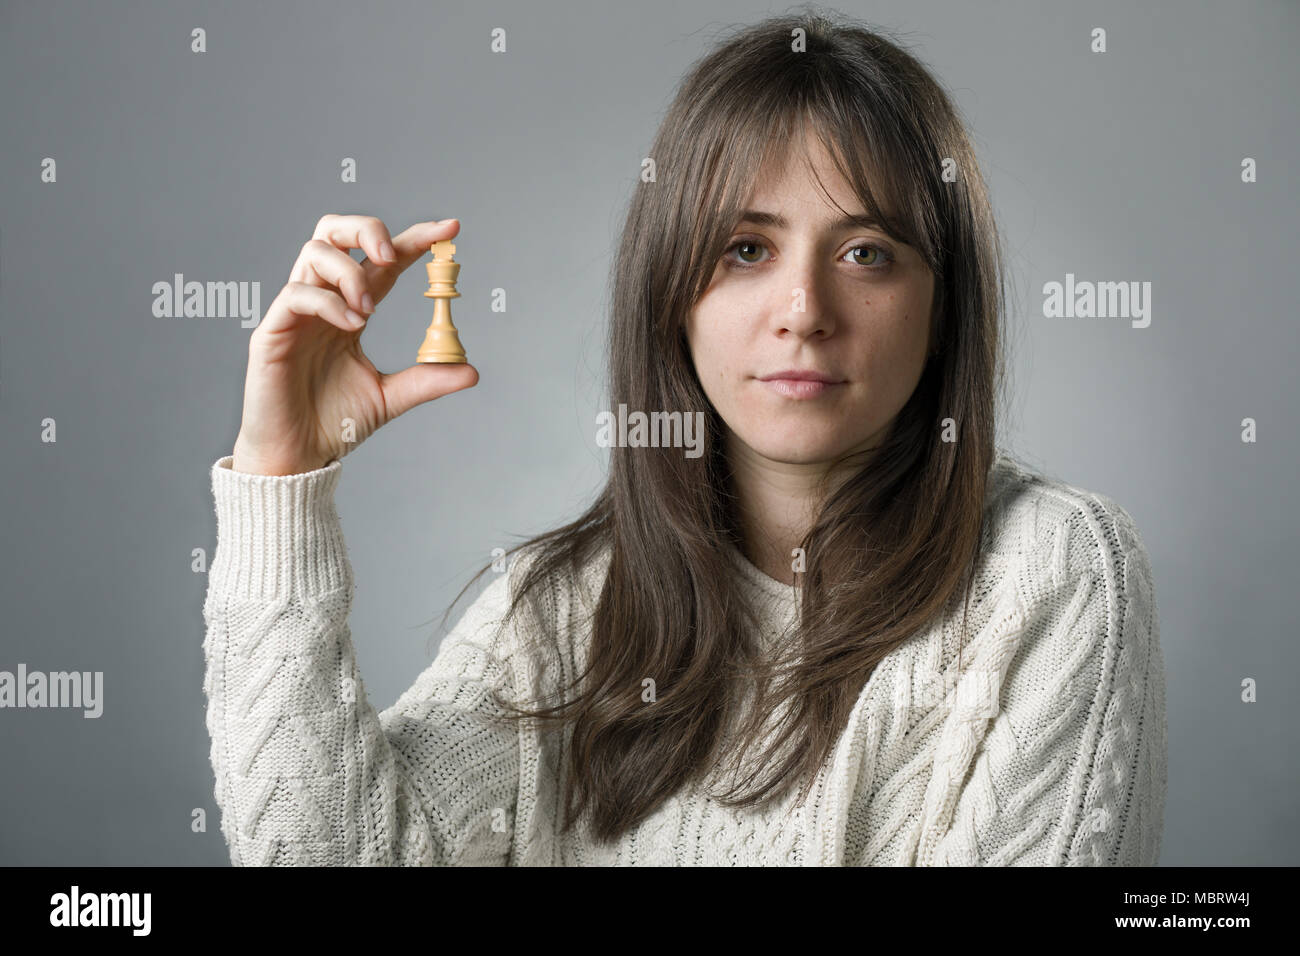 Young Woman Holding a King Chess Piece with Her Hand Stock Photo